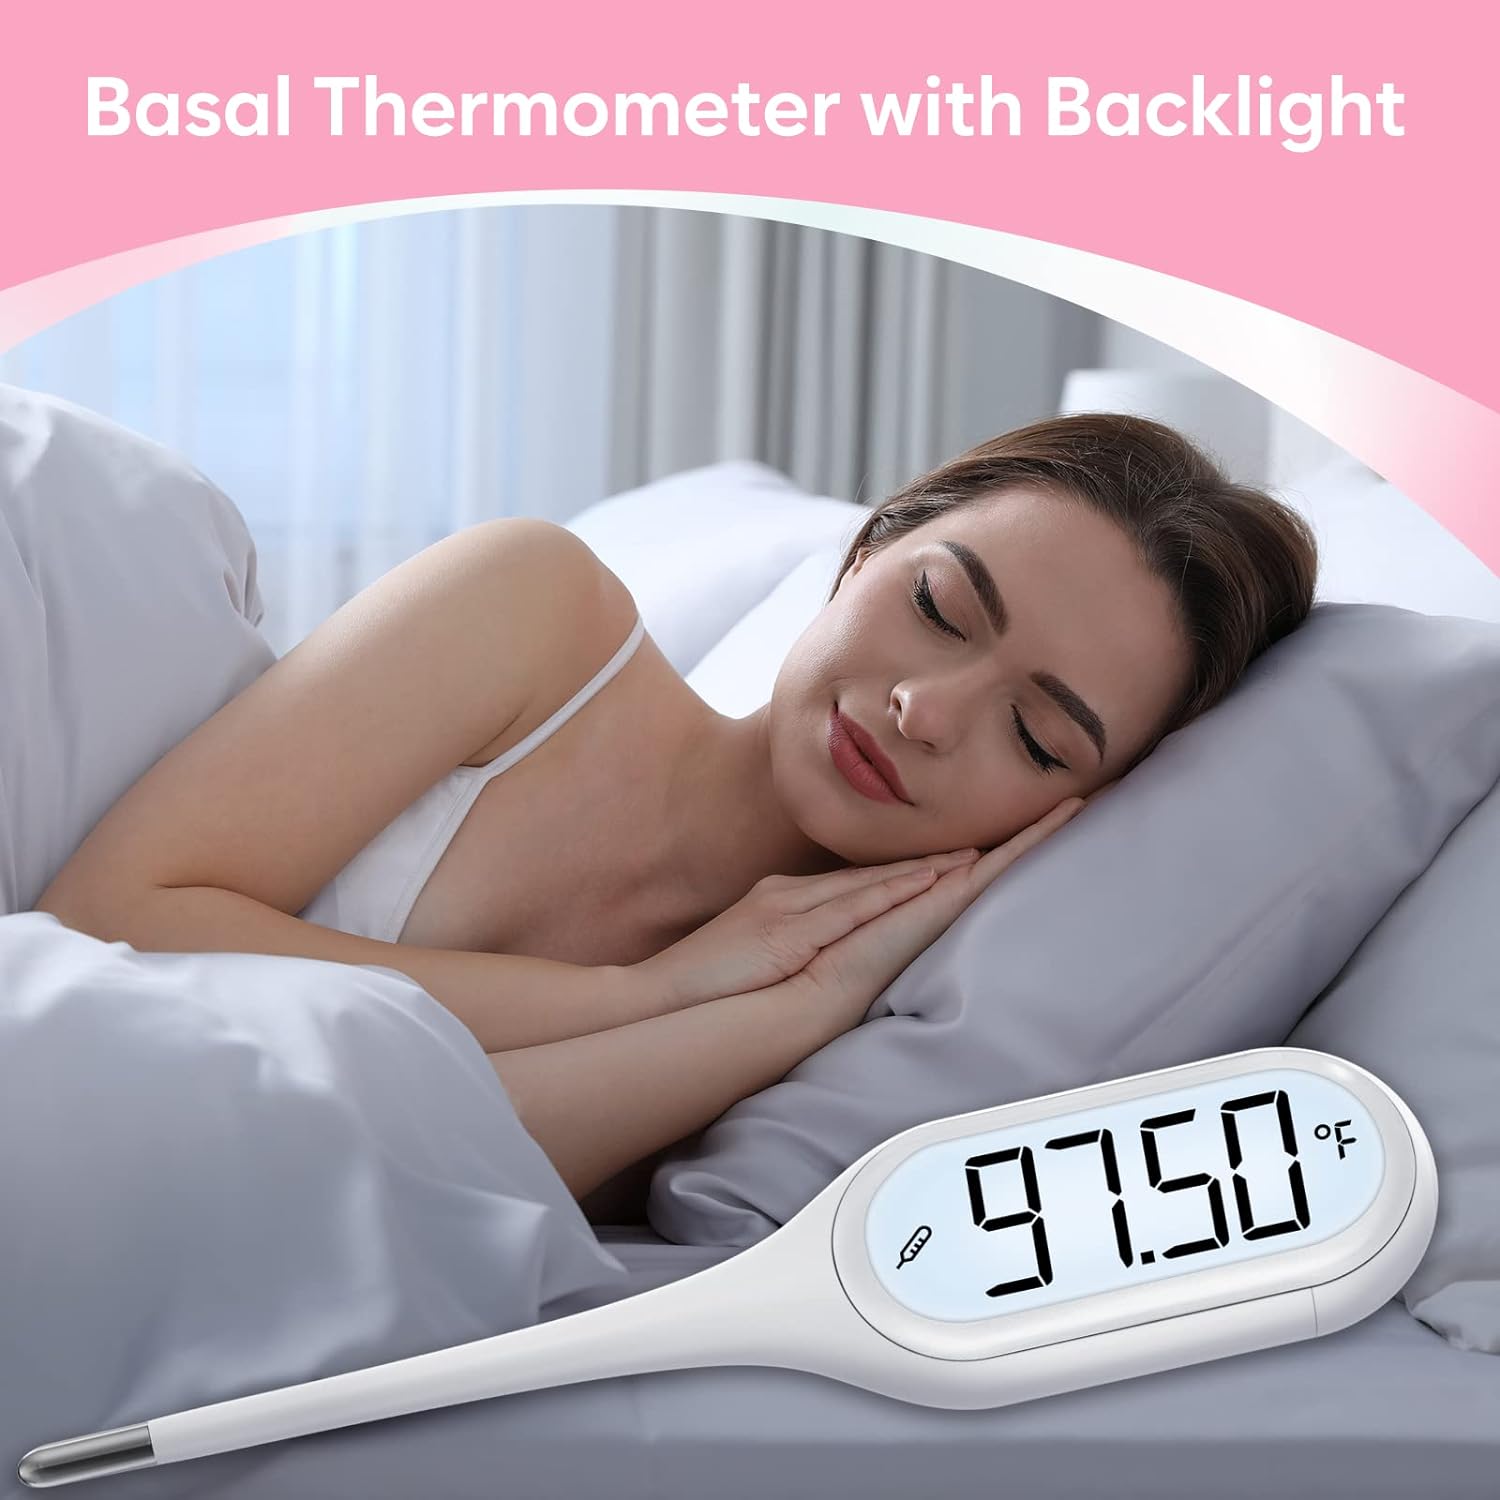 Digital Basal Body Thermometer: Easy@Home Accurate BBT for Ovulation Tracking & Fast Oral Thermometer with Large LCD Backlit Display | 1/100th Degree High Precision & Memory Recall | EBT-013 : Health & Household